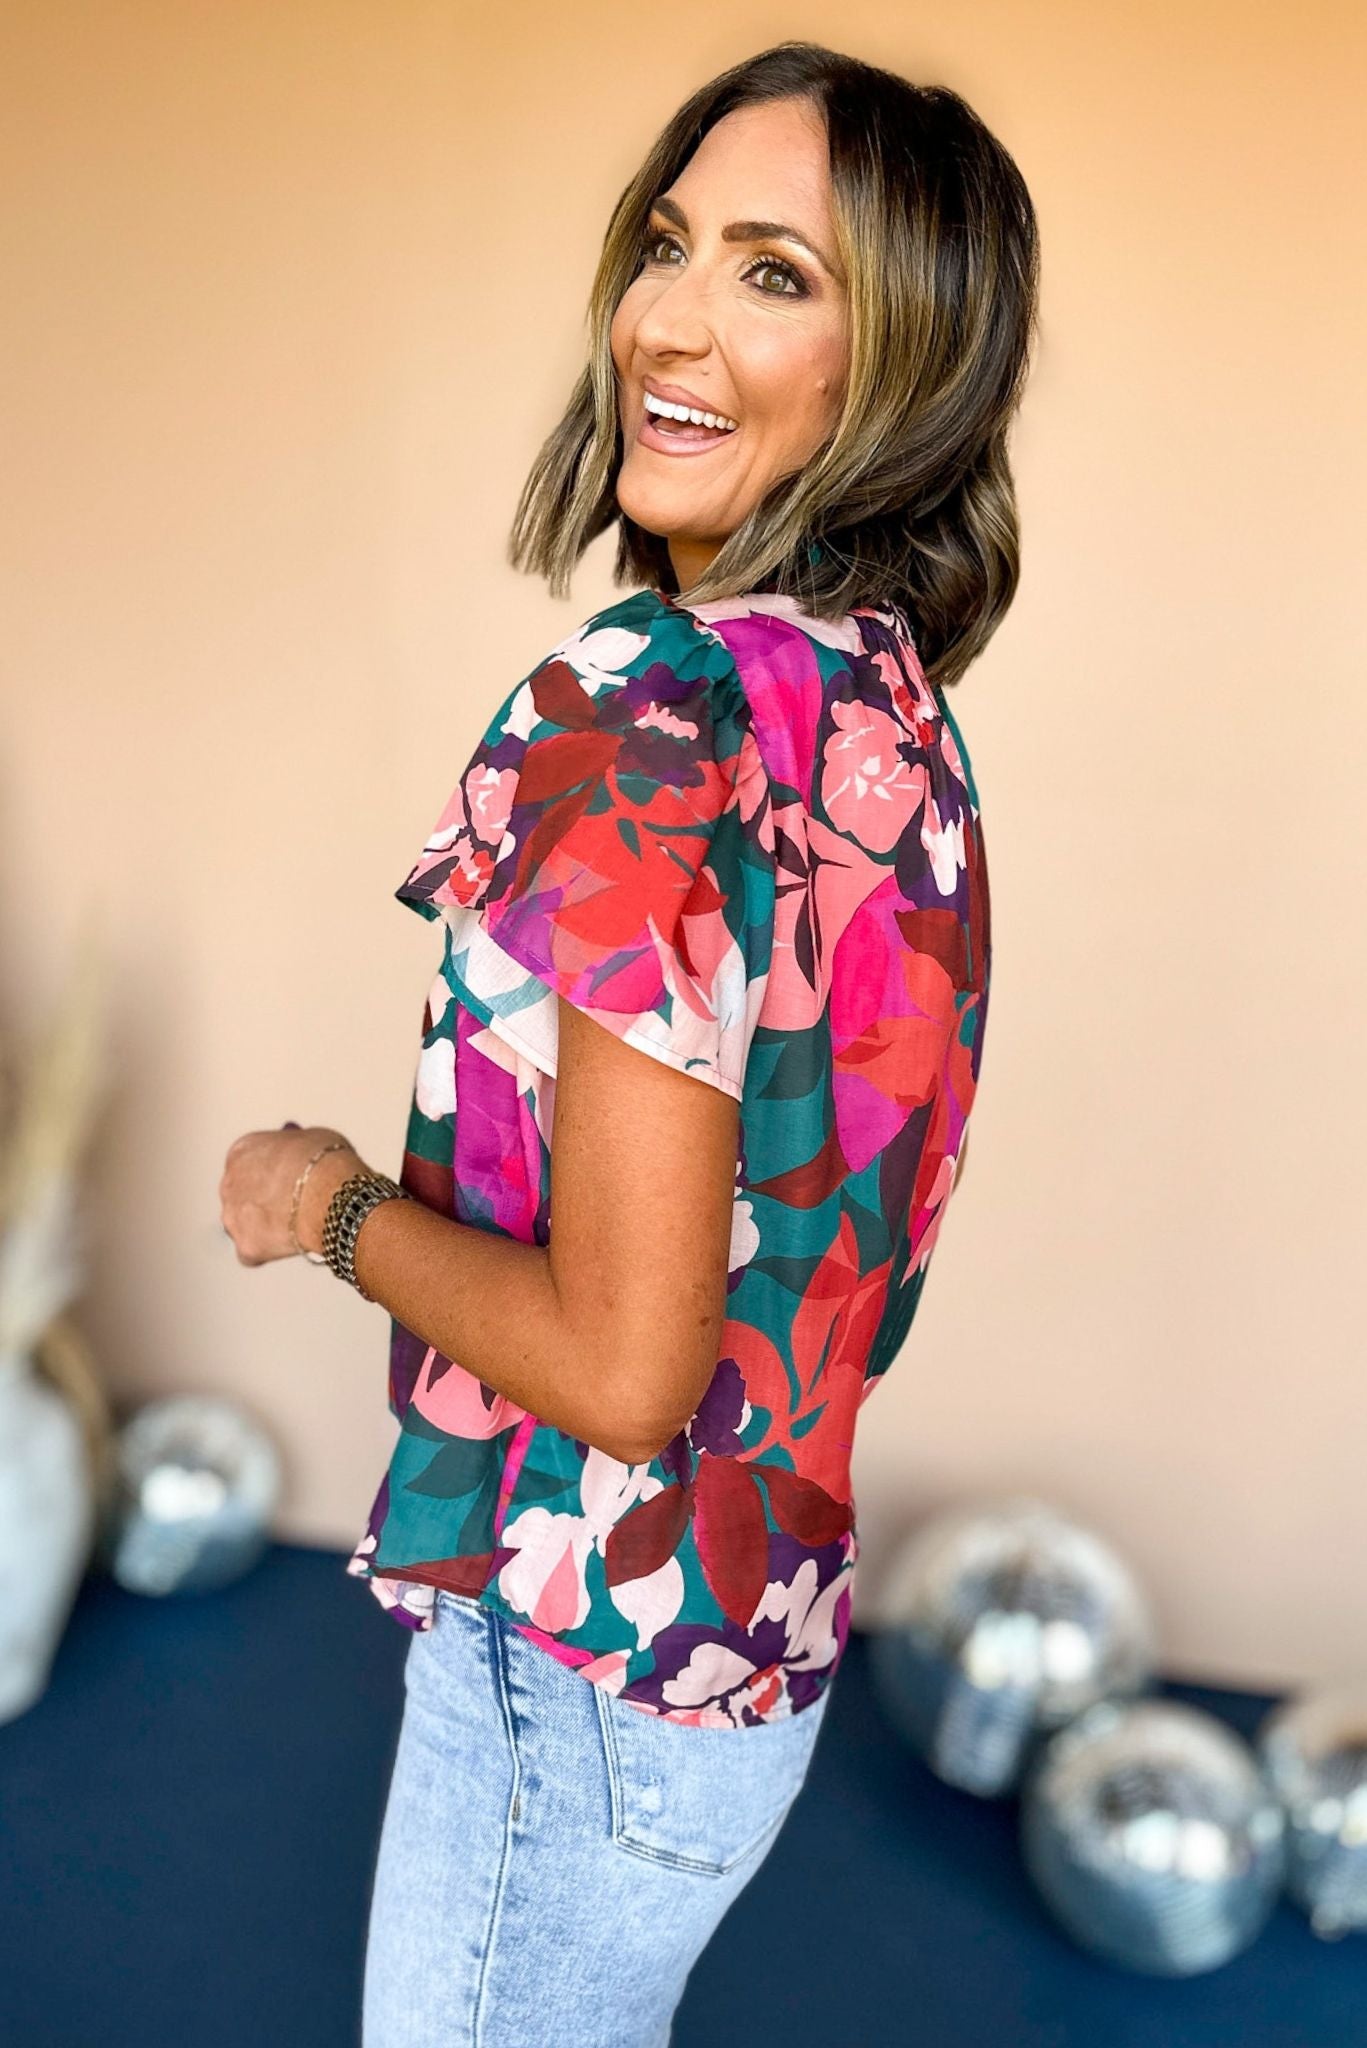 Load image into Gallery viewer, THML Teal Multi Floral Printed Flutter Sleeve Top, elevated top, elevaed style, must have top, must have style, fall top, printed top, mom style, fall fashion, shop style your senses by mallory fitzsimmons
